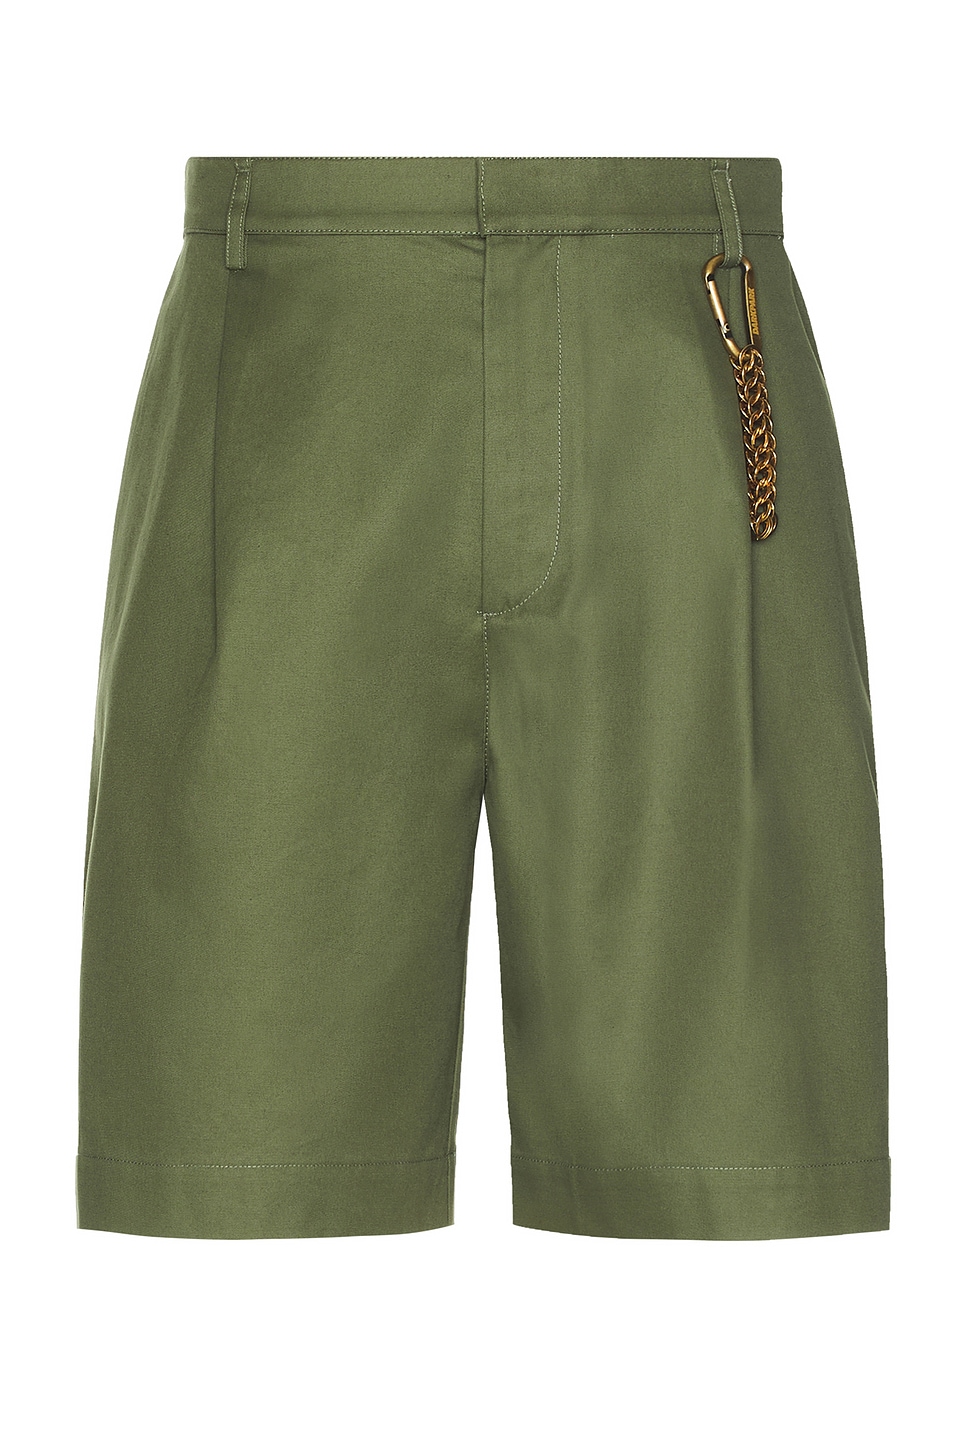 Image 1 of DARKPARK Danny Wide Leg Shorts in Military Green